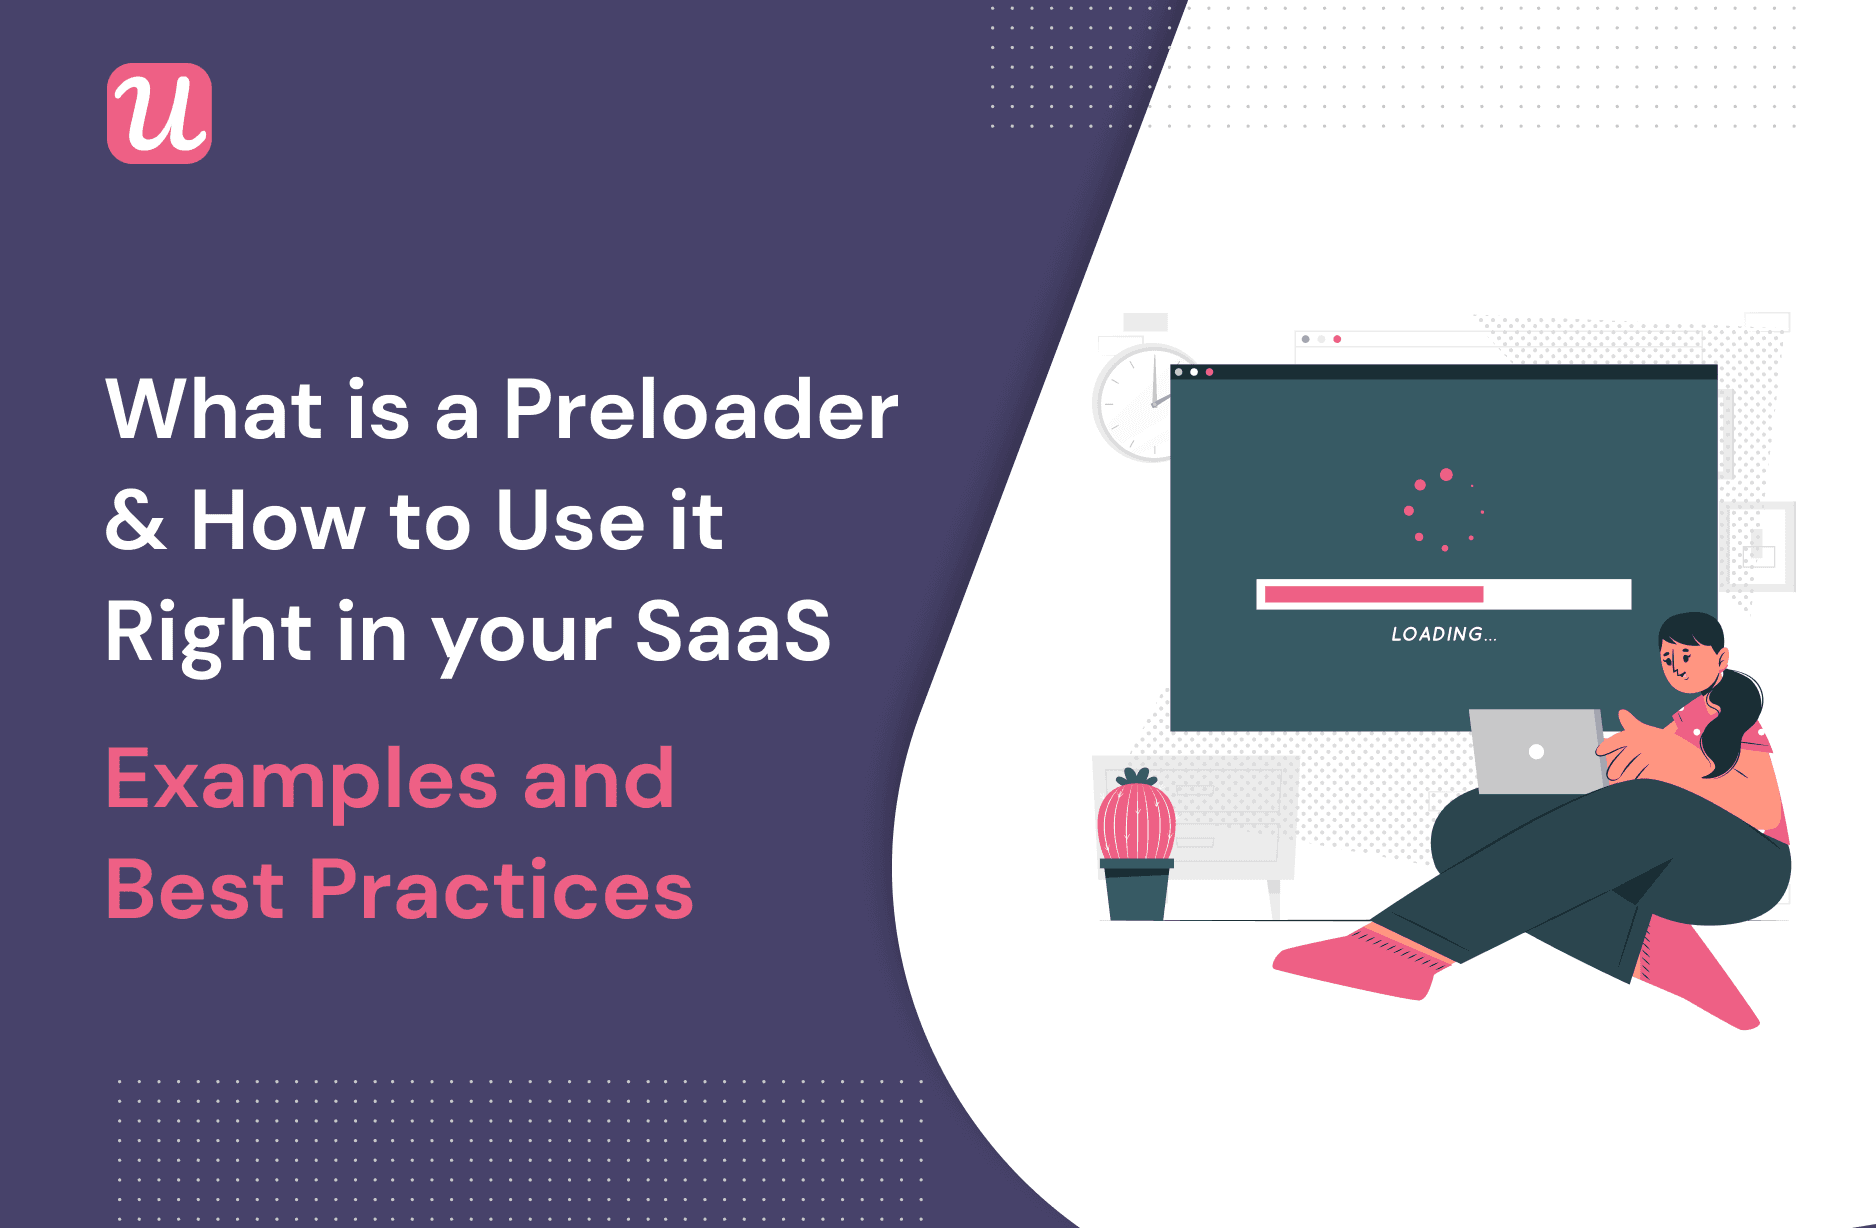 What is a Preloader and How to Use it Right in Your SaaS - Examples and Best Practices